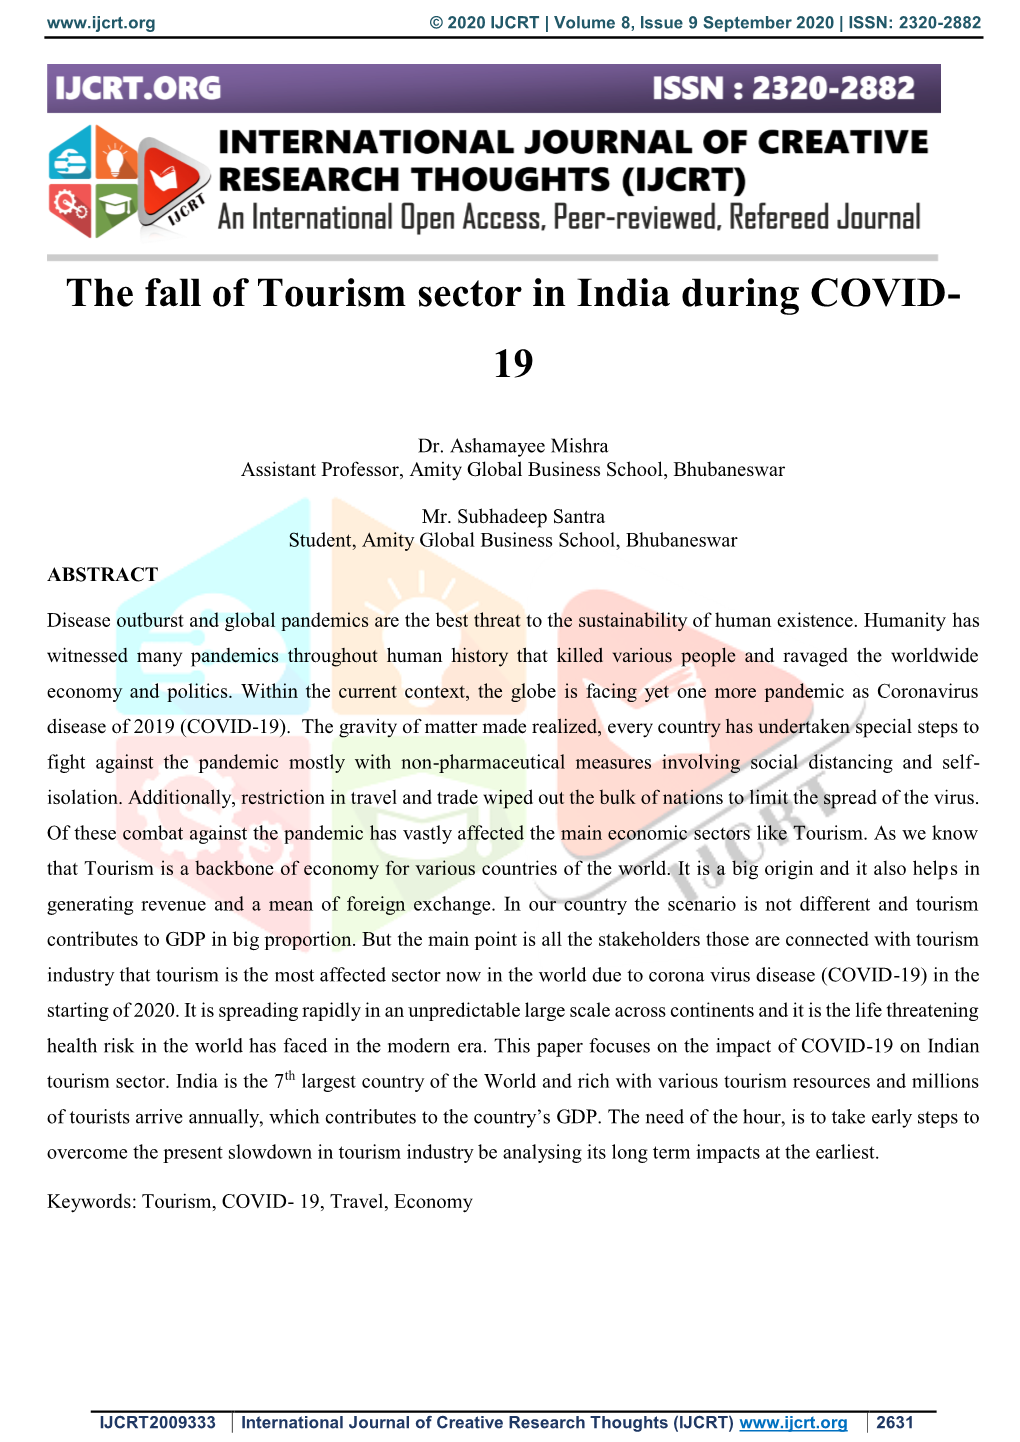 The Fall of Tourism Sector in India During COVID- 19